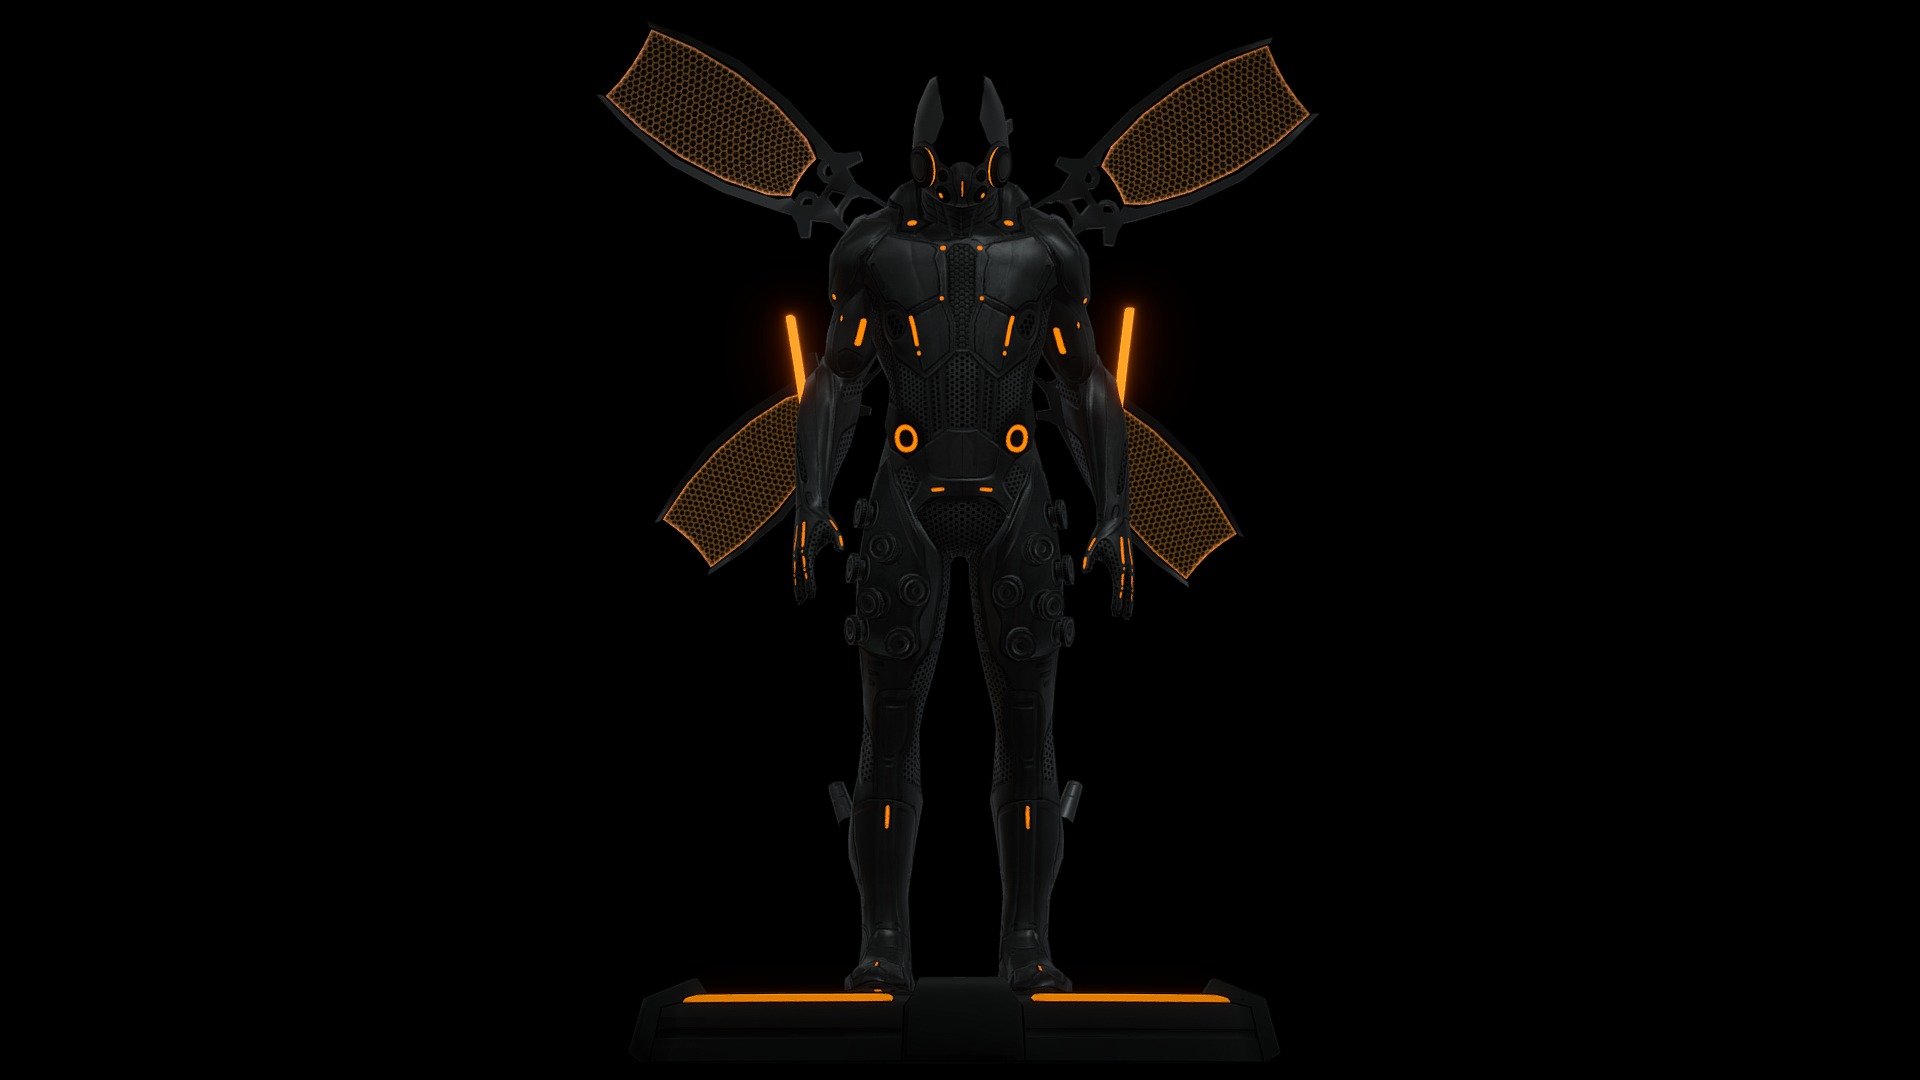 Black Guard from Tron Legacy

Modeled in Maya 2016 - Black Guard - 3D model by Wil (@fapaknight) 3d model